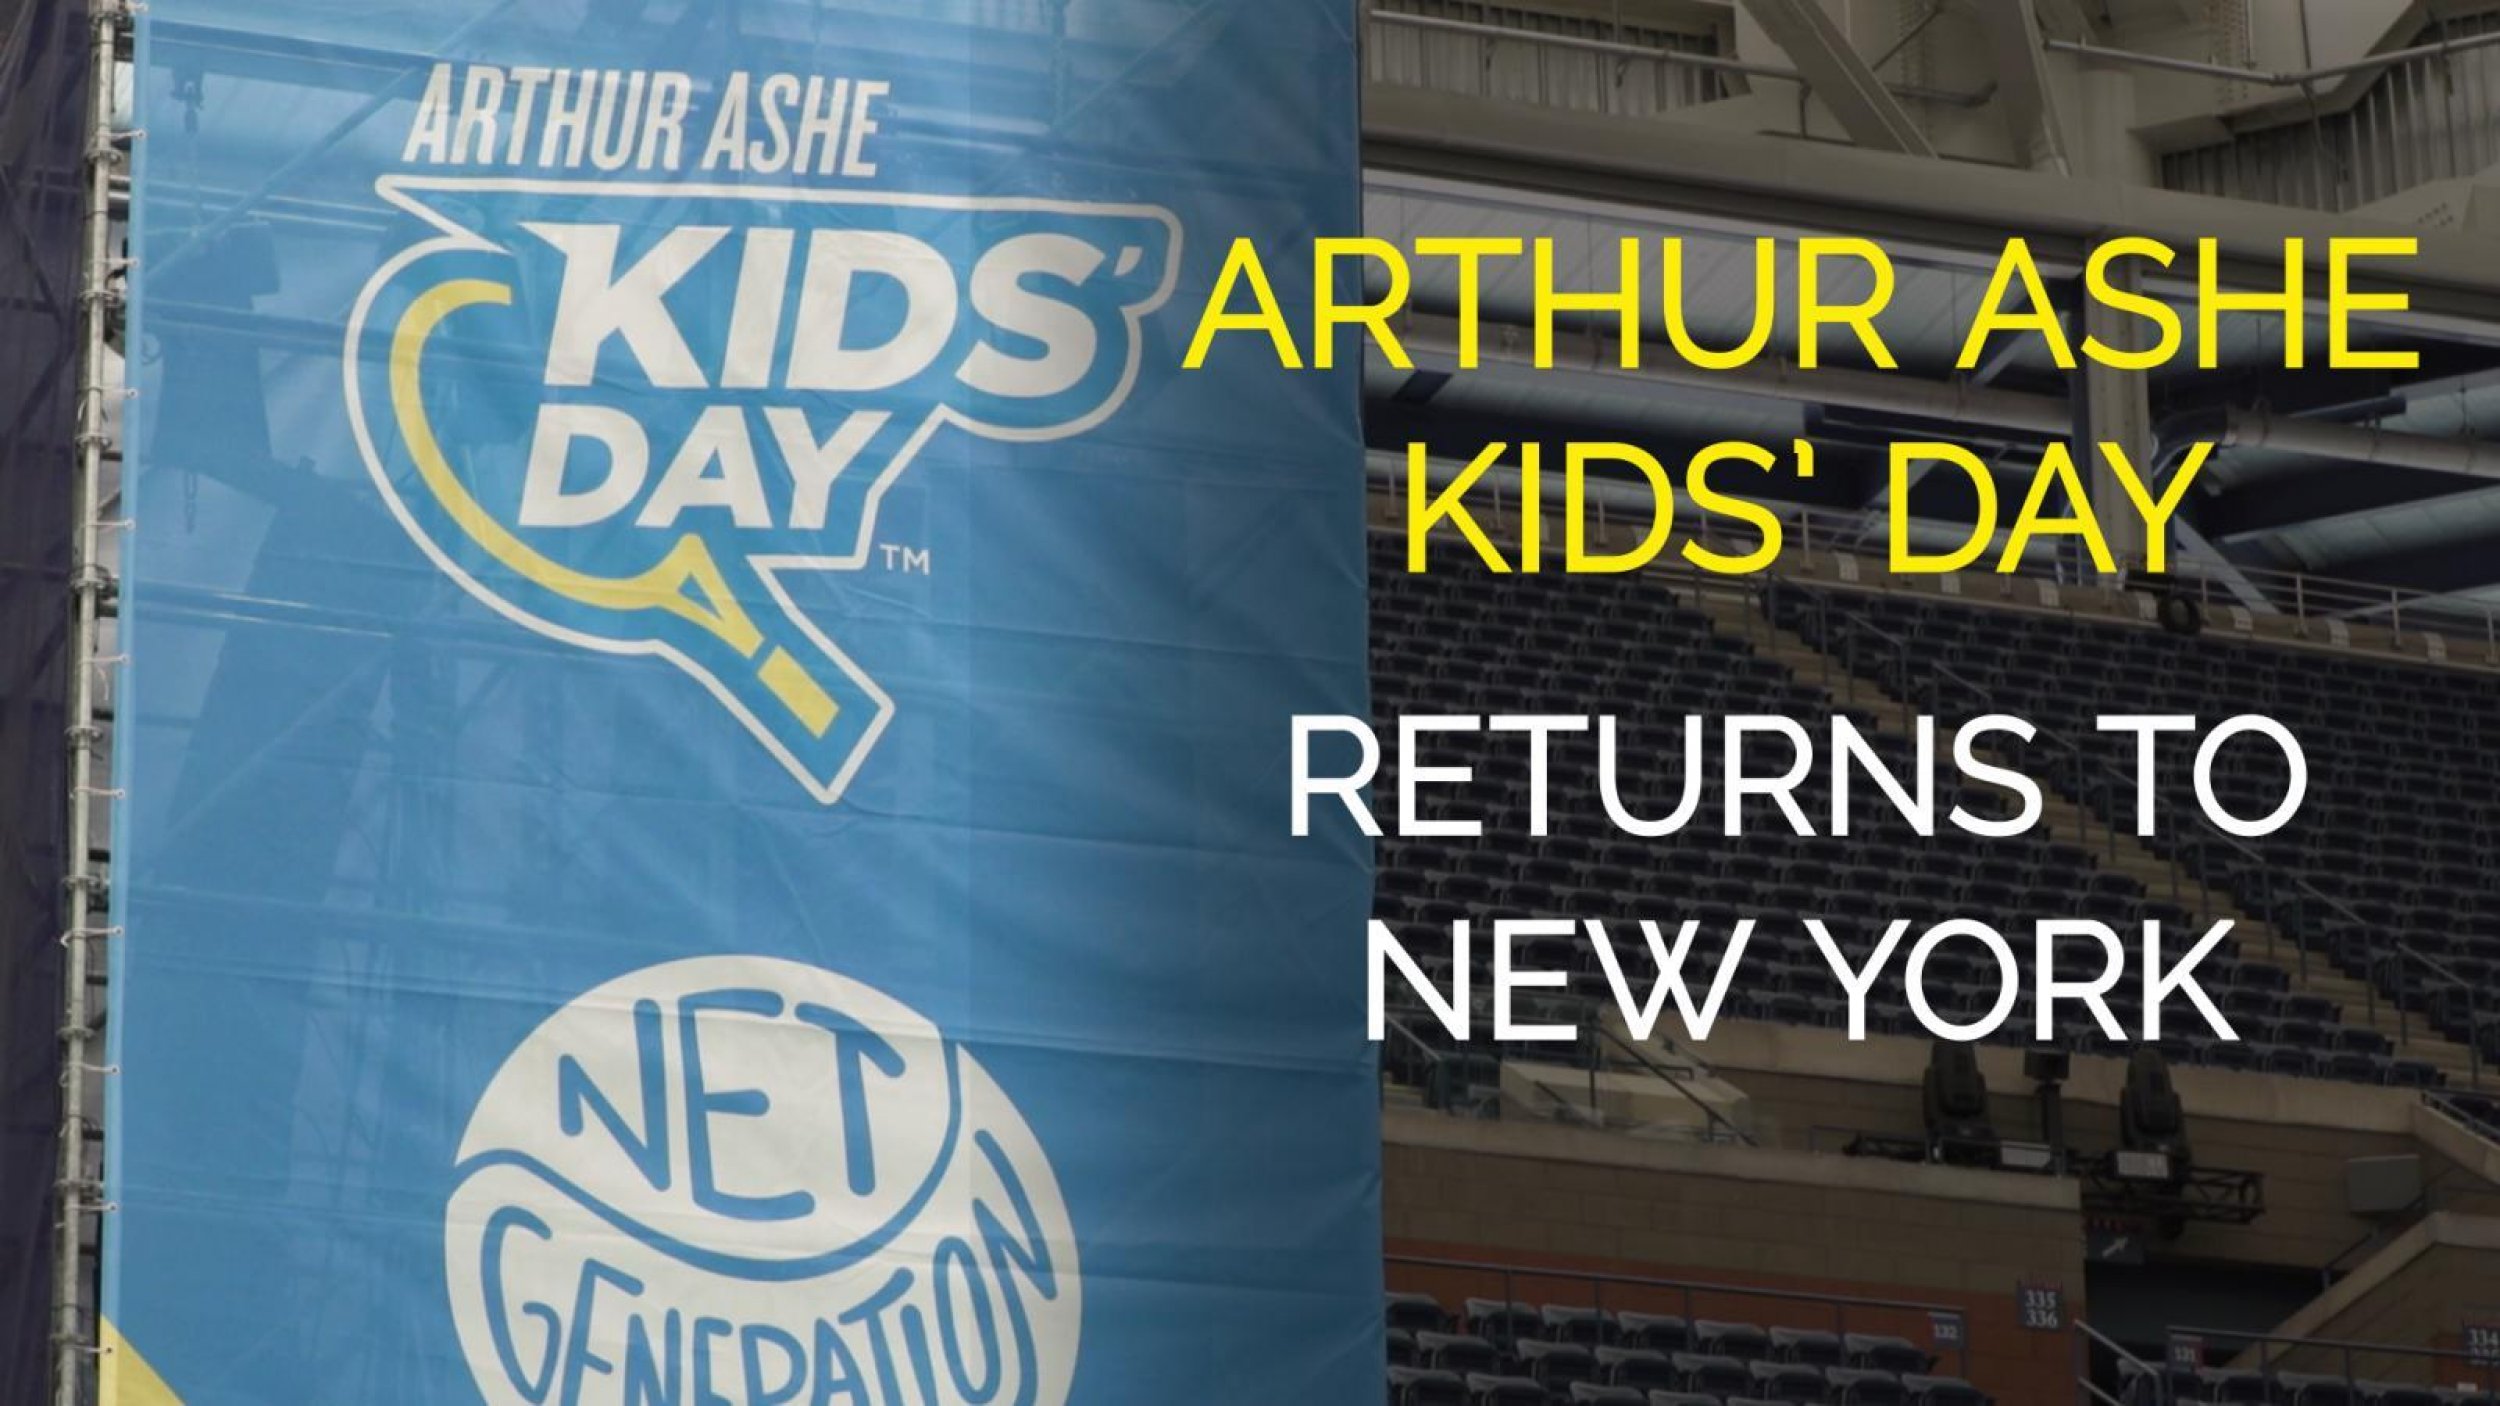 Young Celebrities And Artists Perform For Arthur Ashe Kids Day In New York